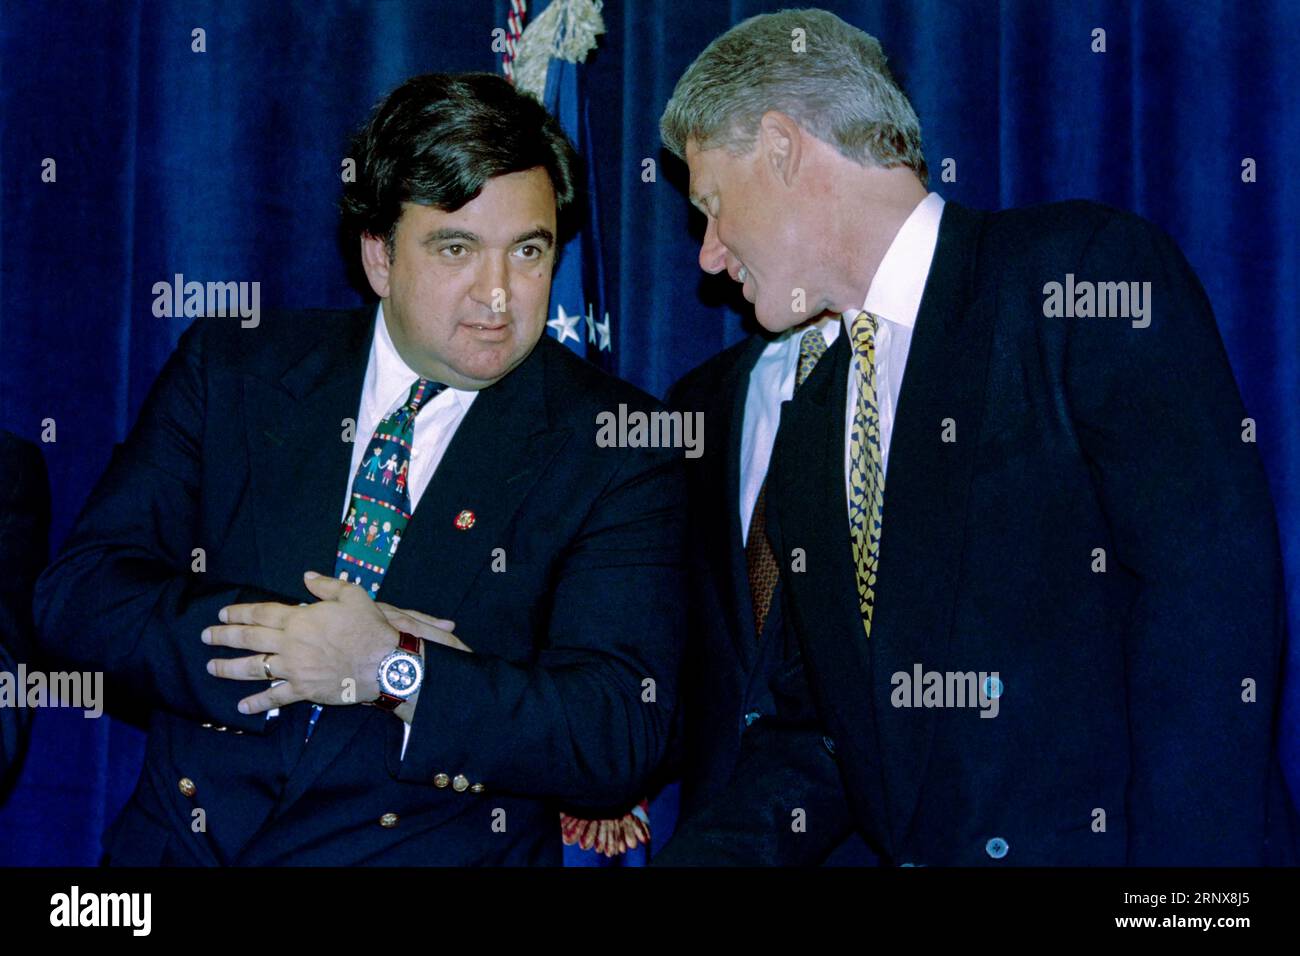 U.S President Bill Clinton, right, speaks with Congressman Bill Richardson, left, during a Cinco de Mayo celebration at the Cineplex Odeon Theatre, May 5, 1995 in Washington, D.C. The Clinton’s attended the premiere of “My Family-Mi Familia” hosted by the National Council of La Rasa and the Congressional Hispanic Caucus. Stock Photo